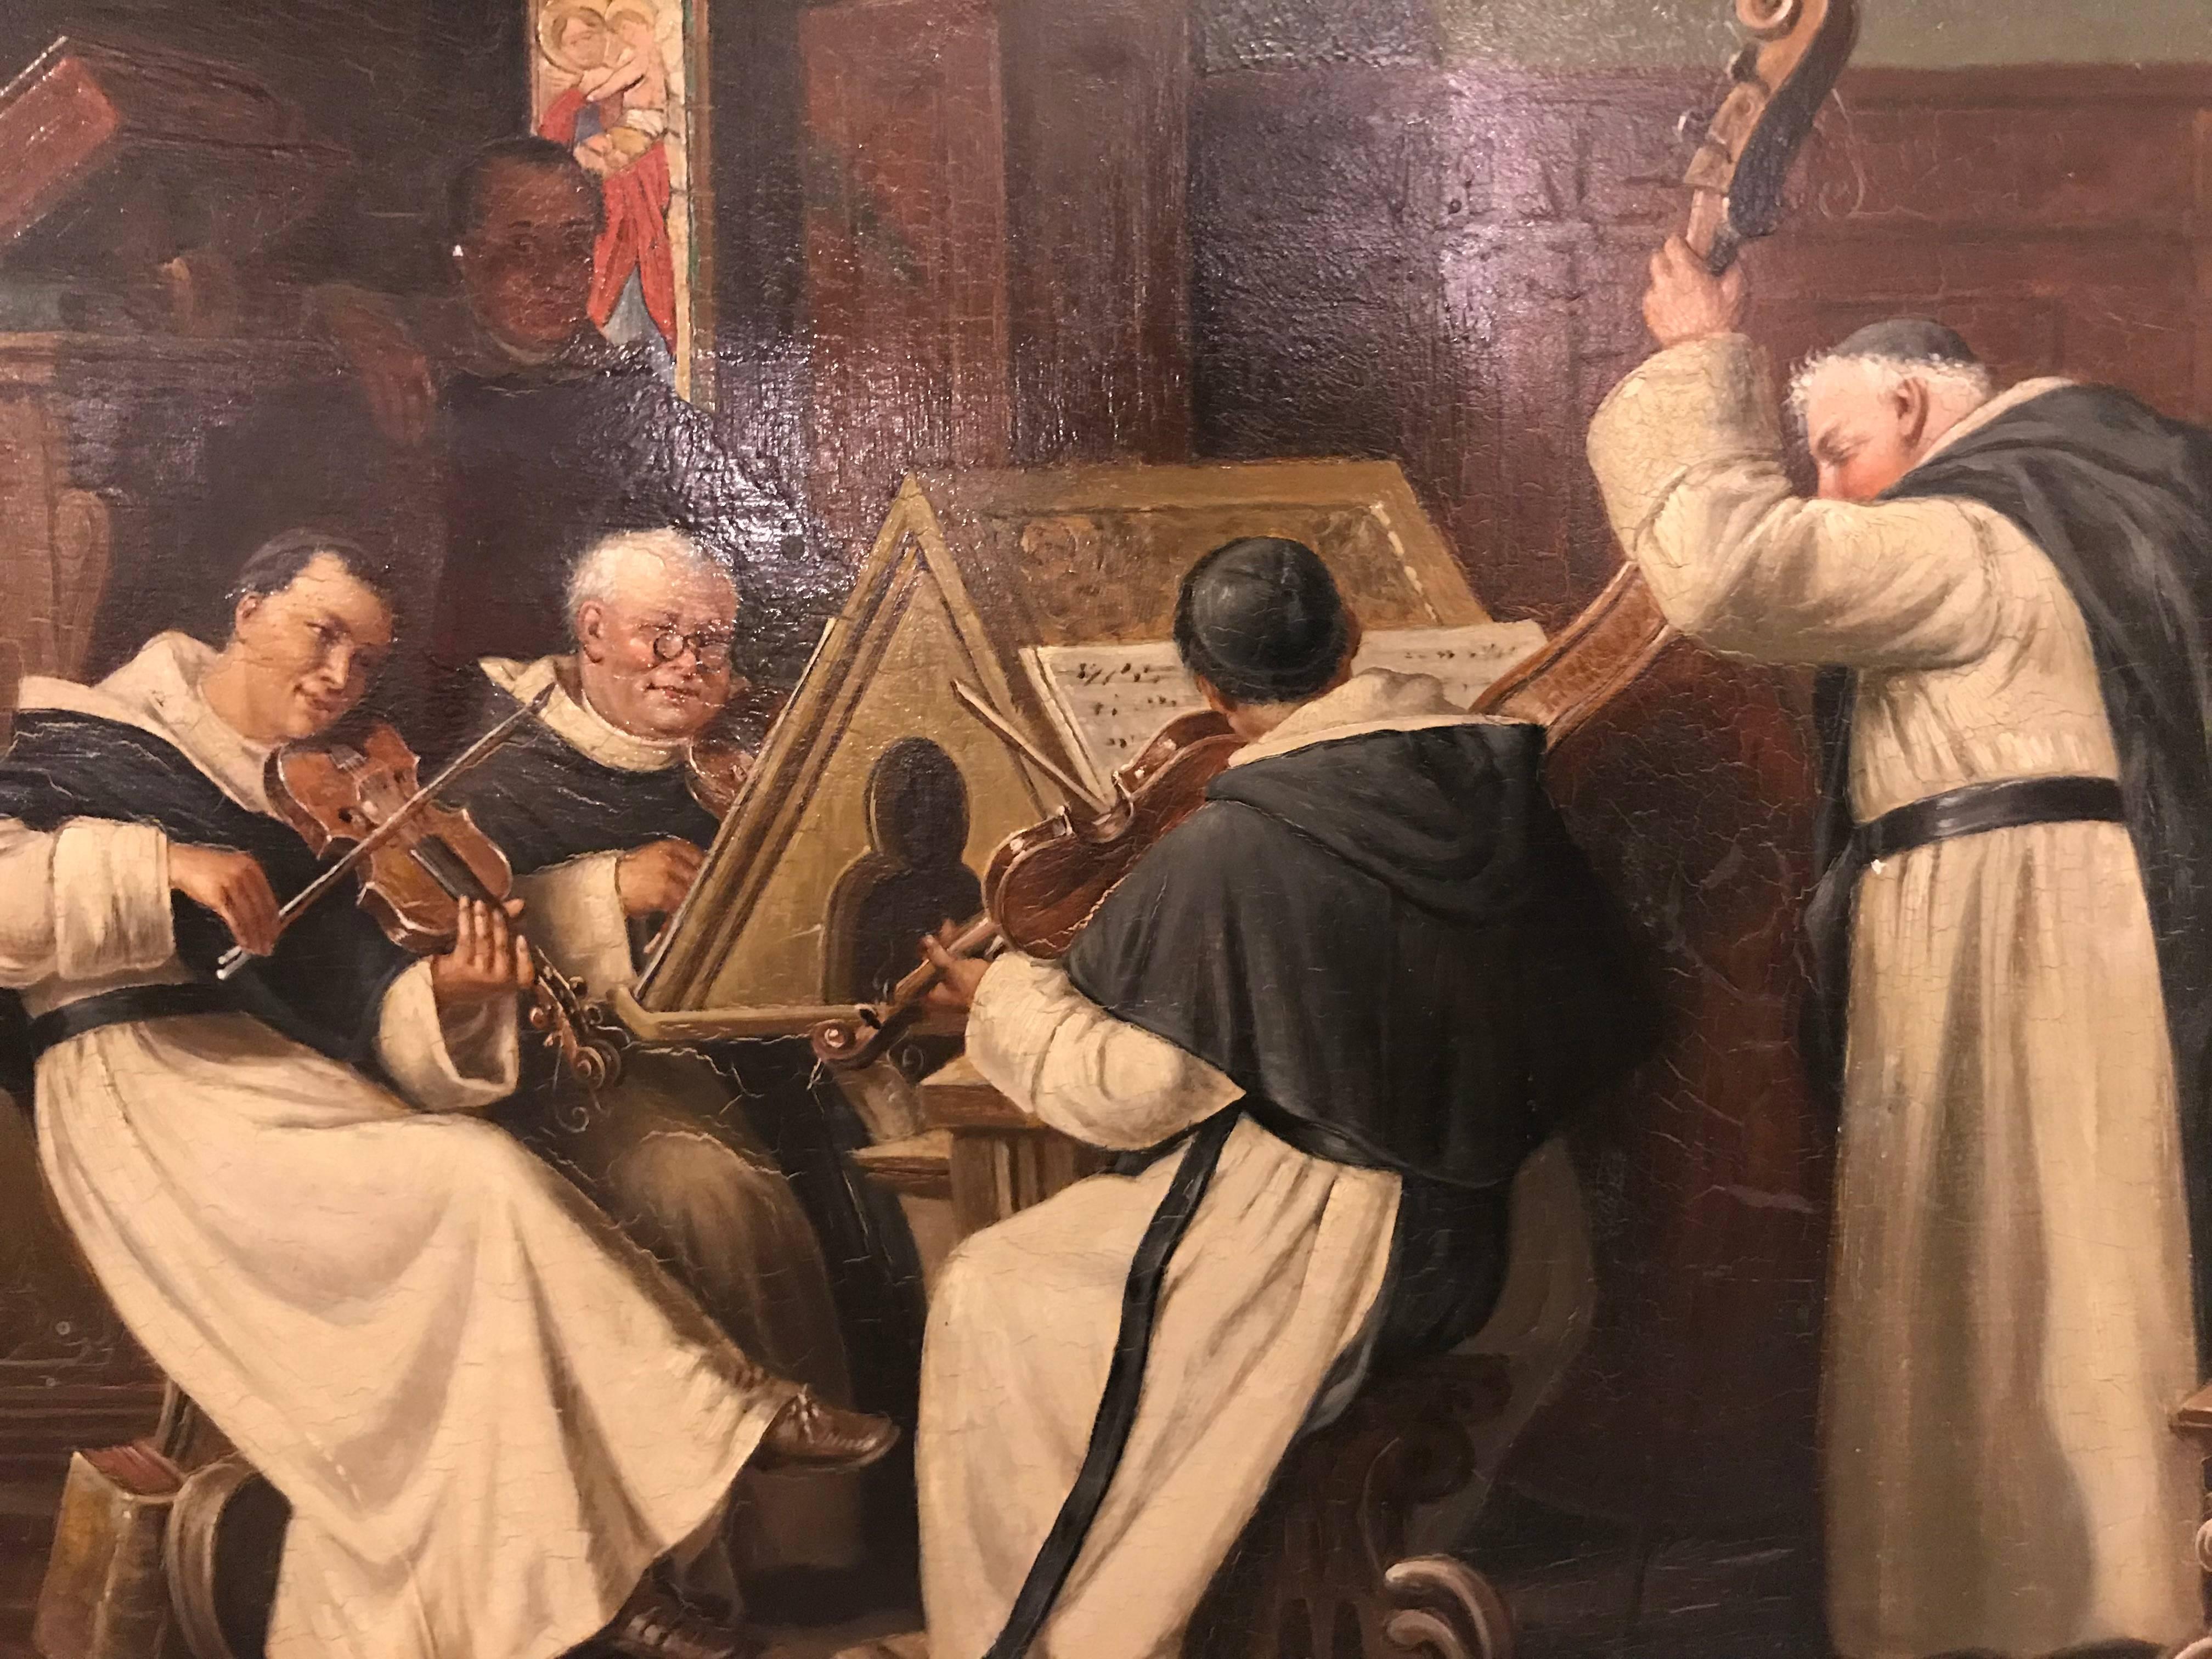 A late 19th-early 20th century oil painting of a group of monks on board. Wonderfully detained. 
Measurement without frame: 12 in H 16.75 in W
Measurement with frame: 17 in H 21.25 in W.

 